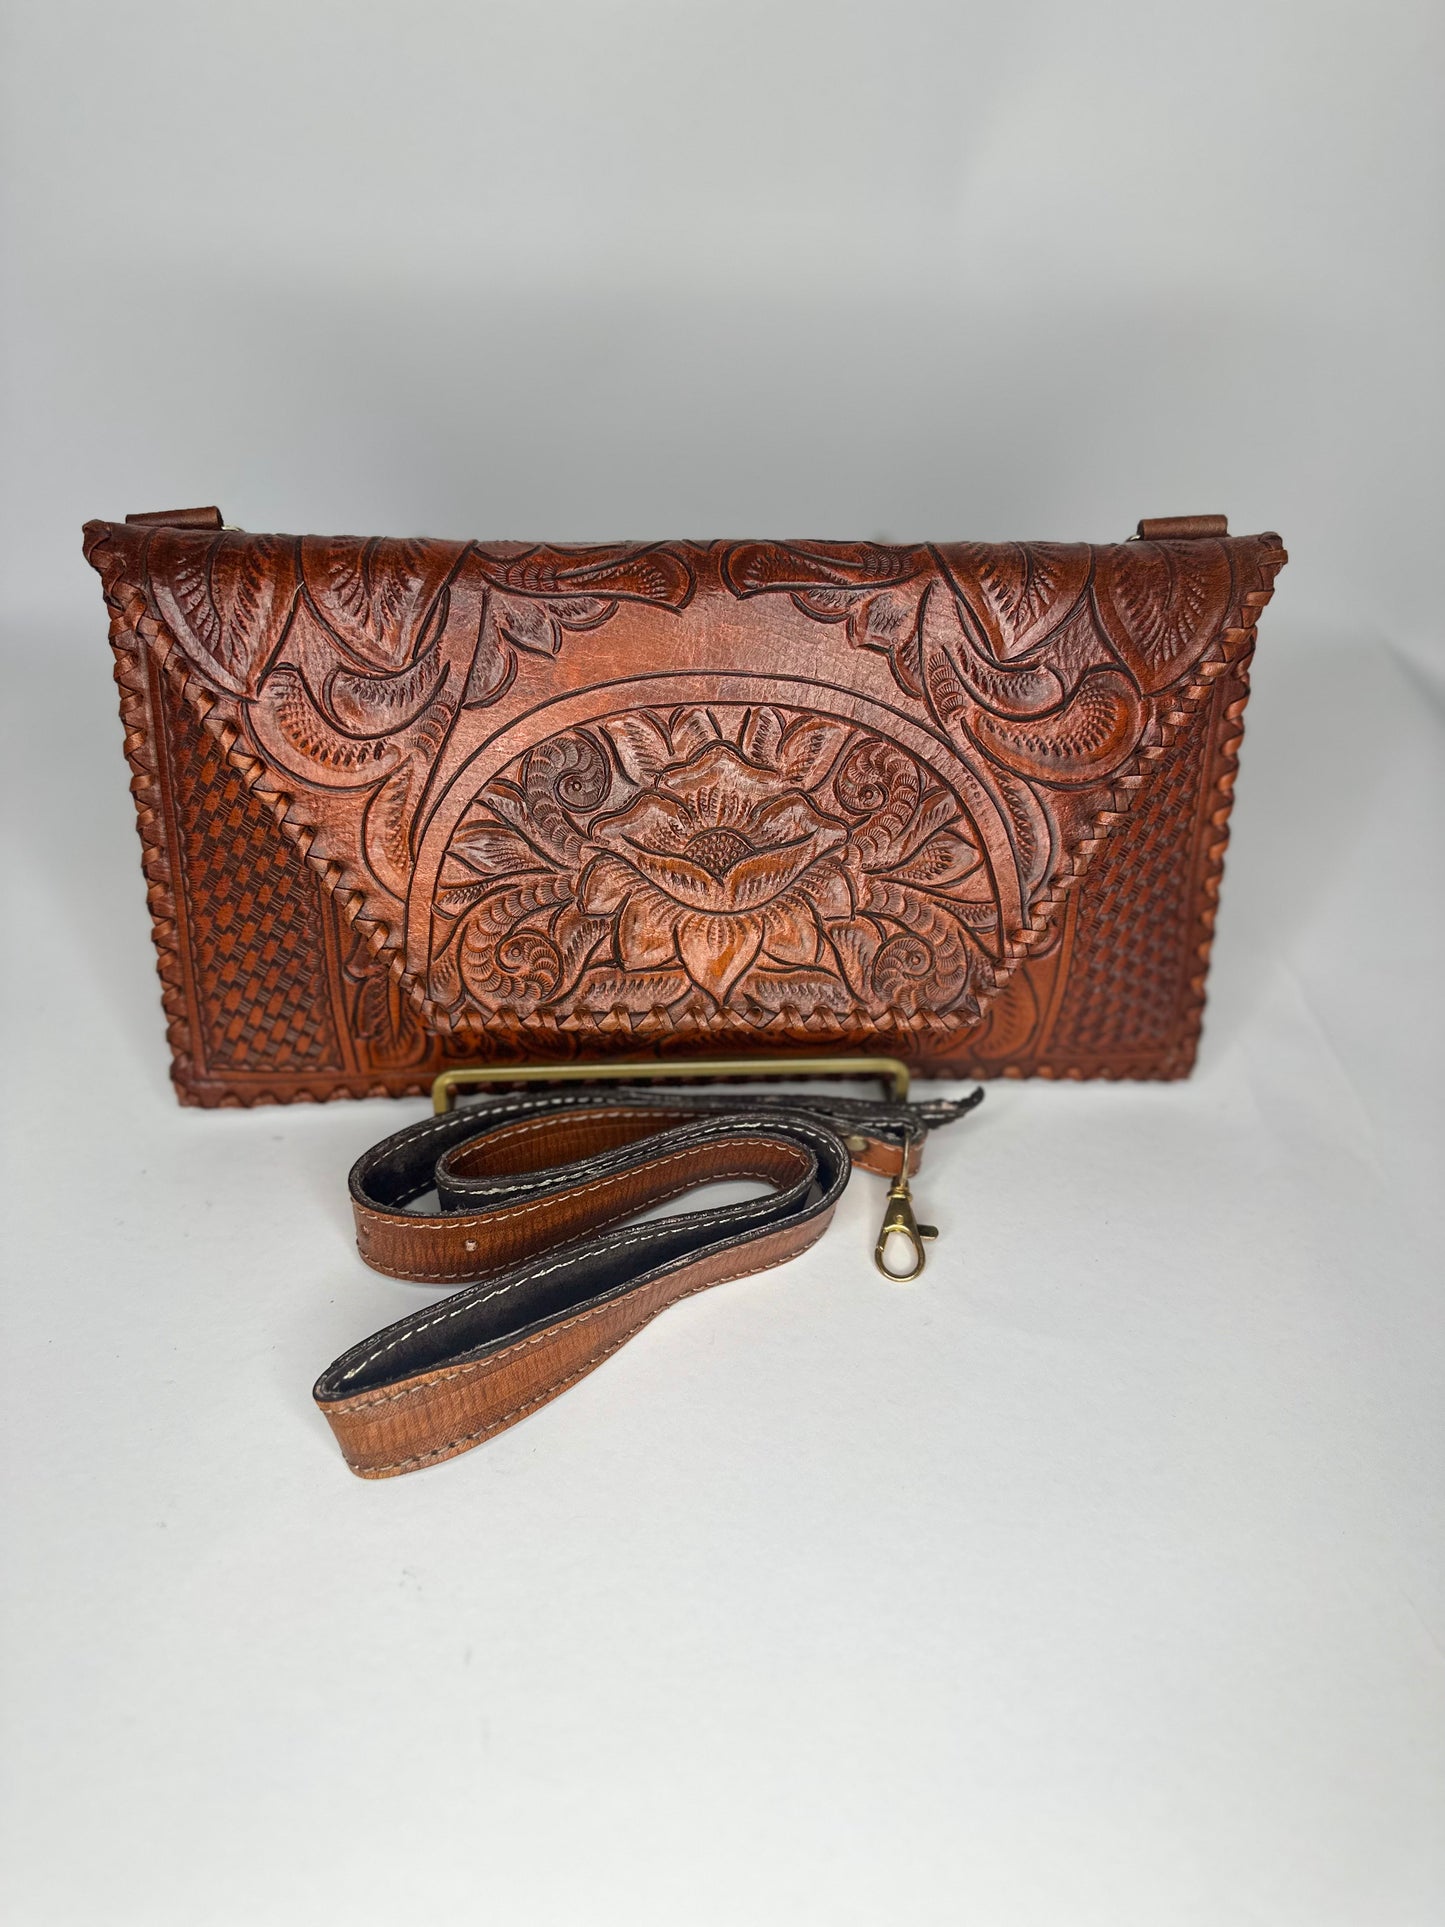 Handmade Mexican authentic leather clutch with floral design etched on top flap. Squared design etched on bottom half. Color wine red with strap in front. 